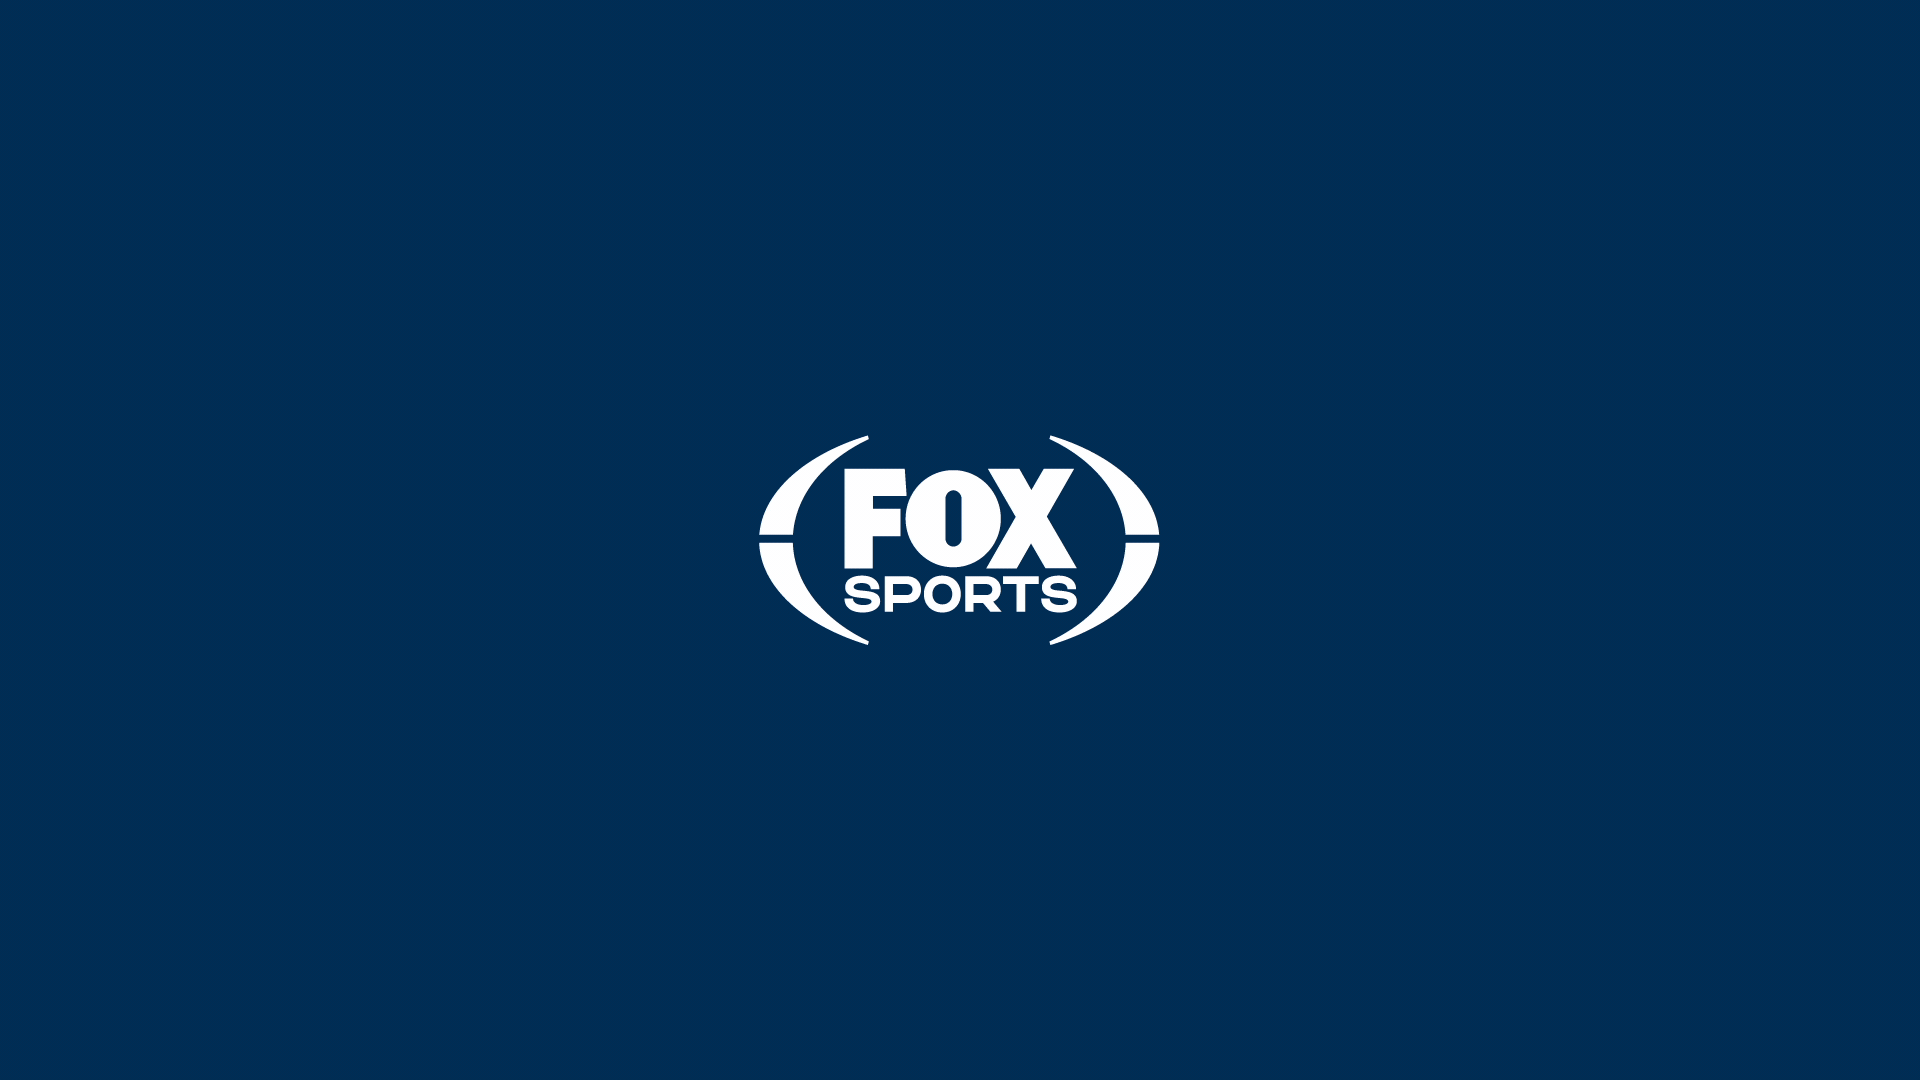 New Logo, Identity, and On-air Look for Fox Sports Netherlands by DixonBaxi